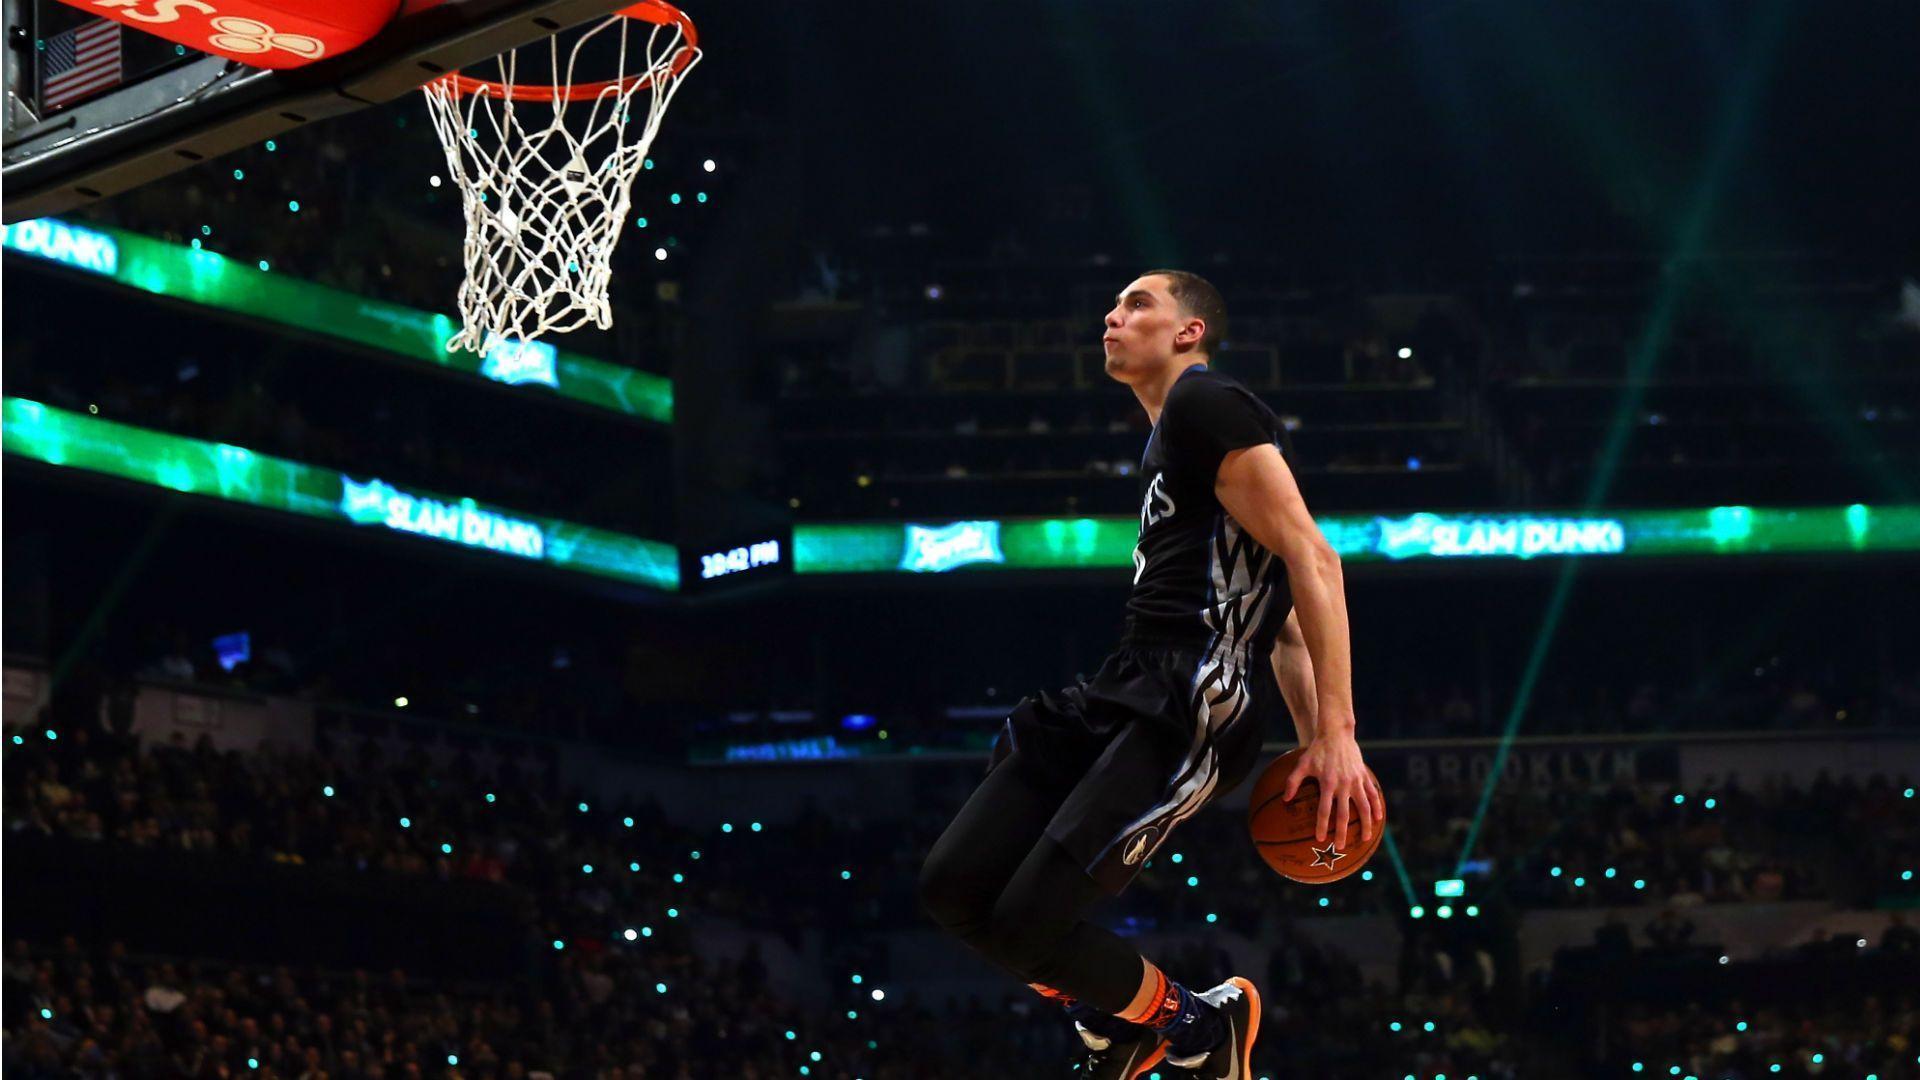 Zach Lavine Wallpaper High Resolution and Quality Download